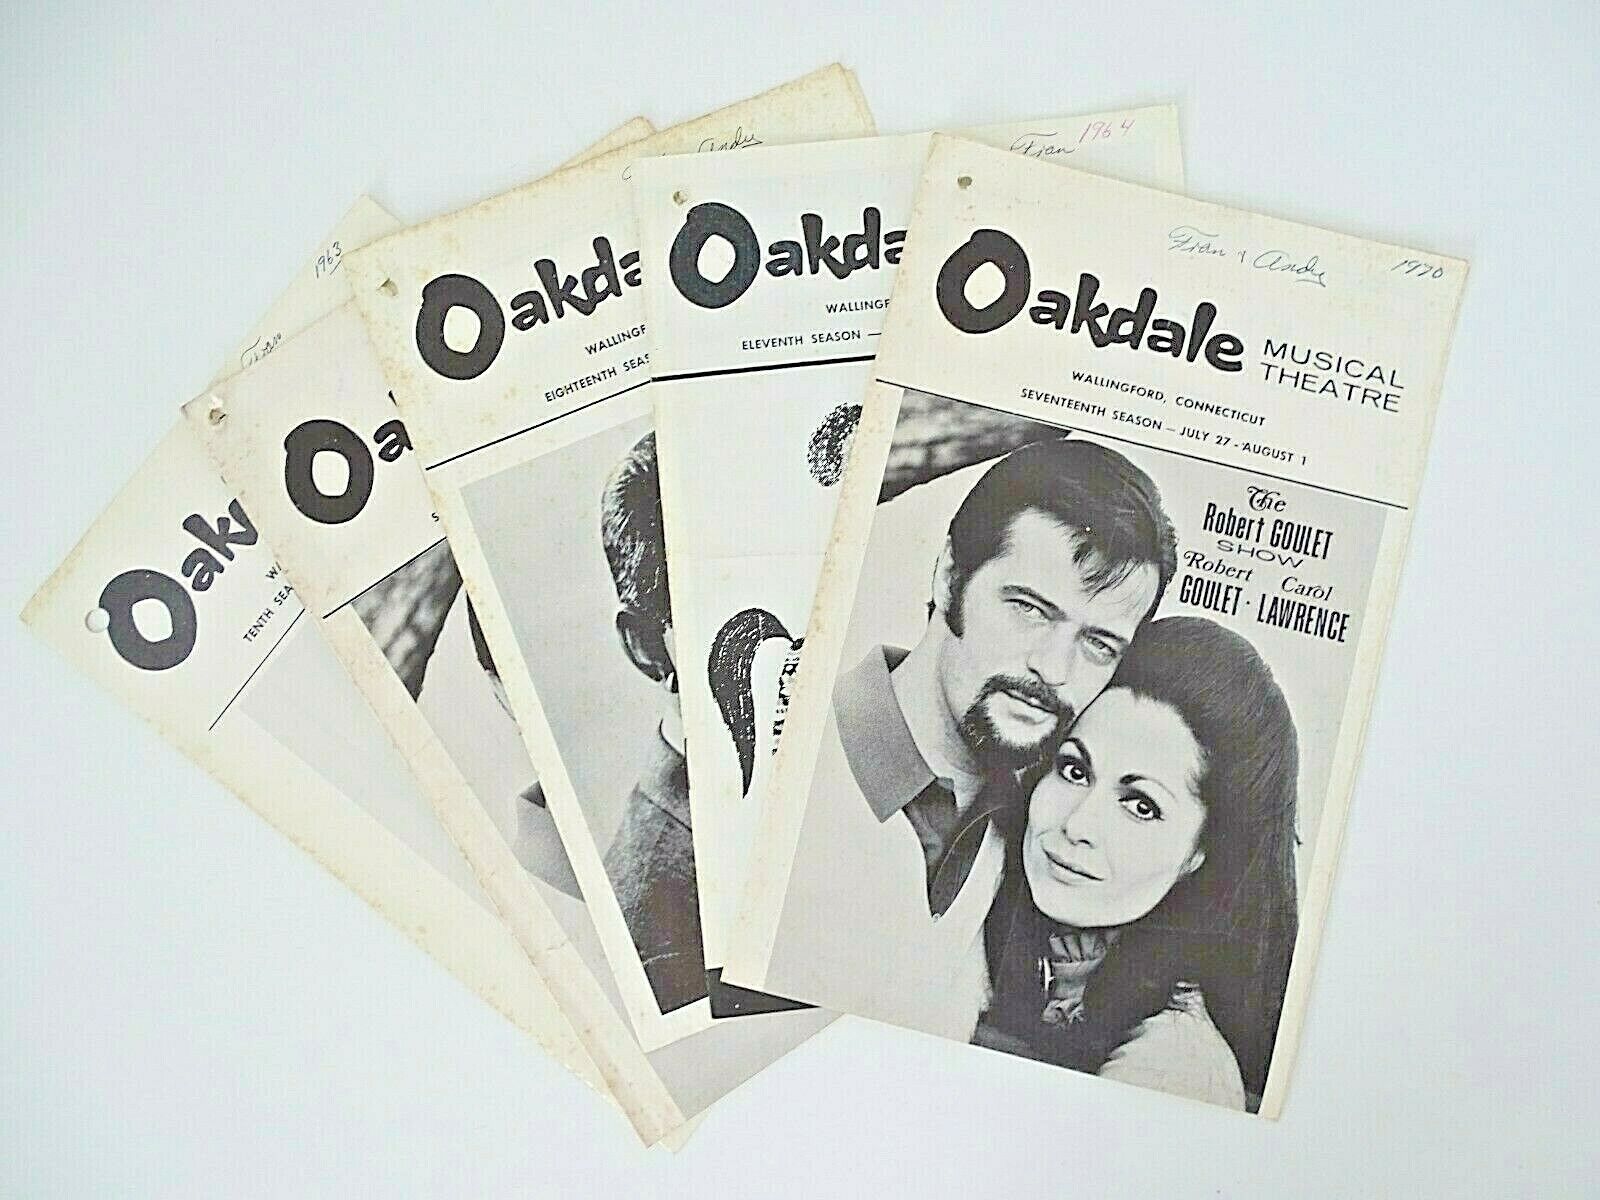 Oakdale Musical Theatre Booklet Programs Wallingford Connecticut Lot of 5  Без бренда